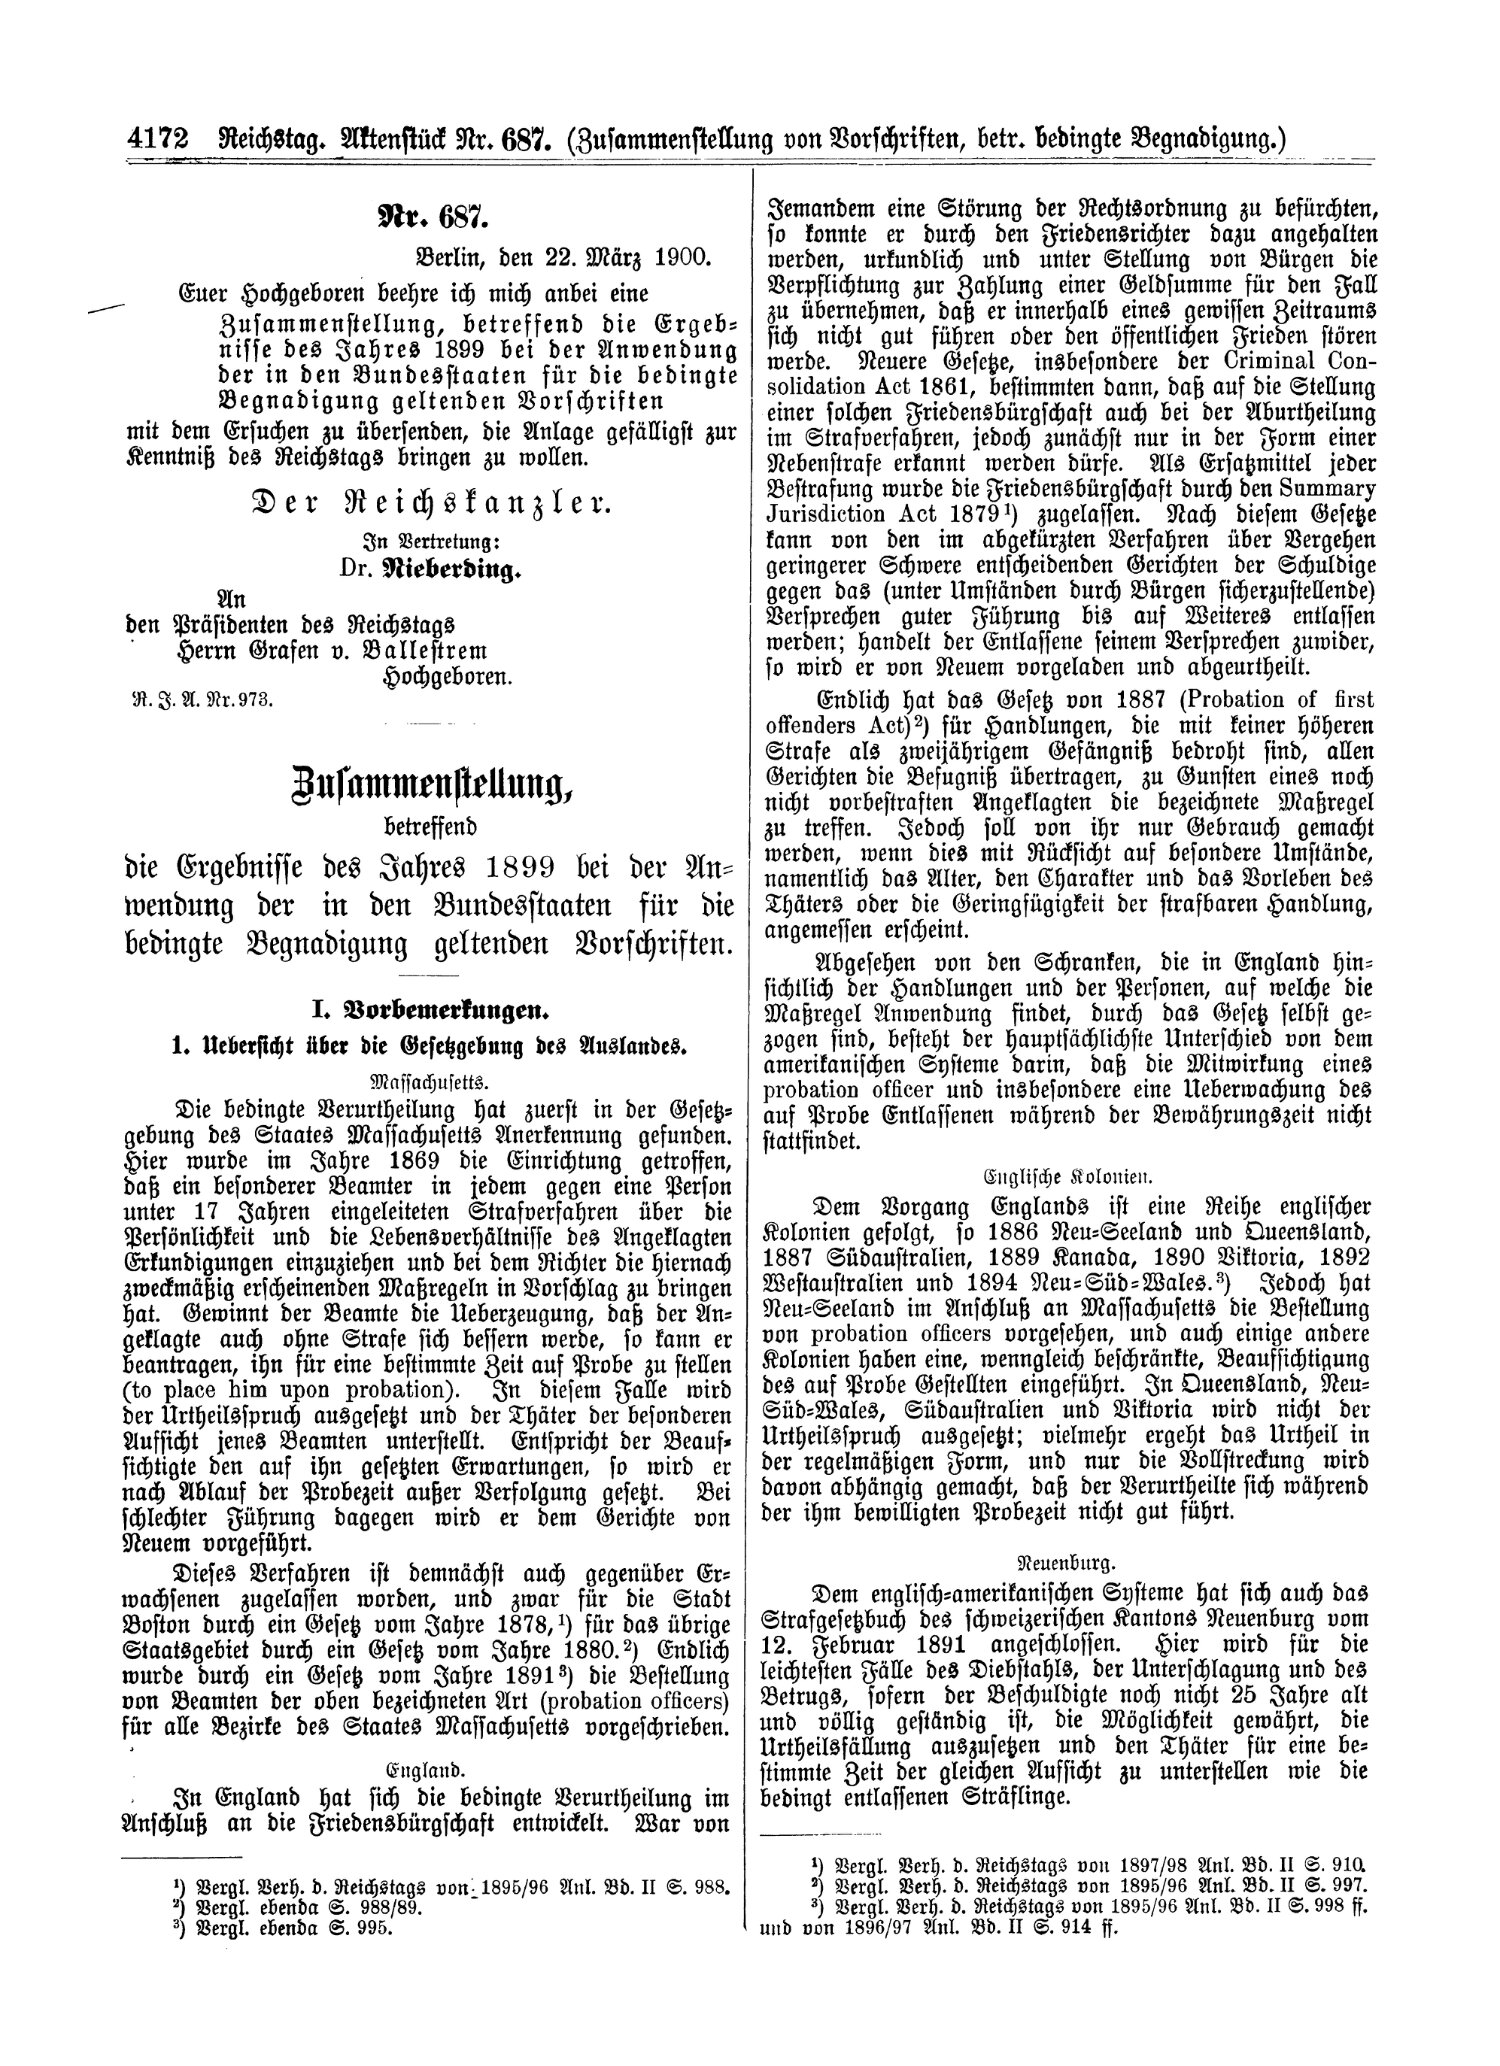 Scan of page 4172